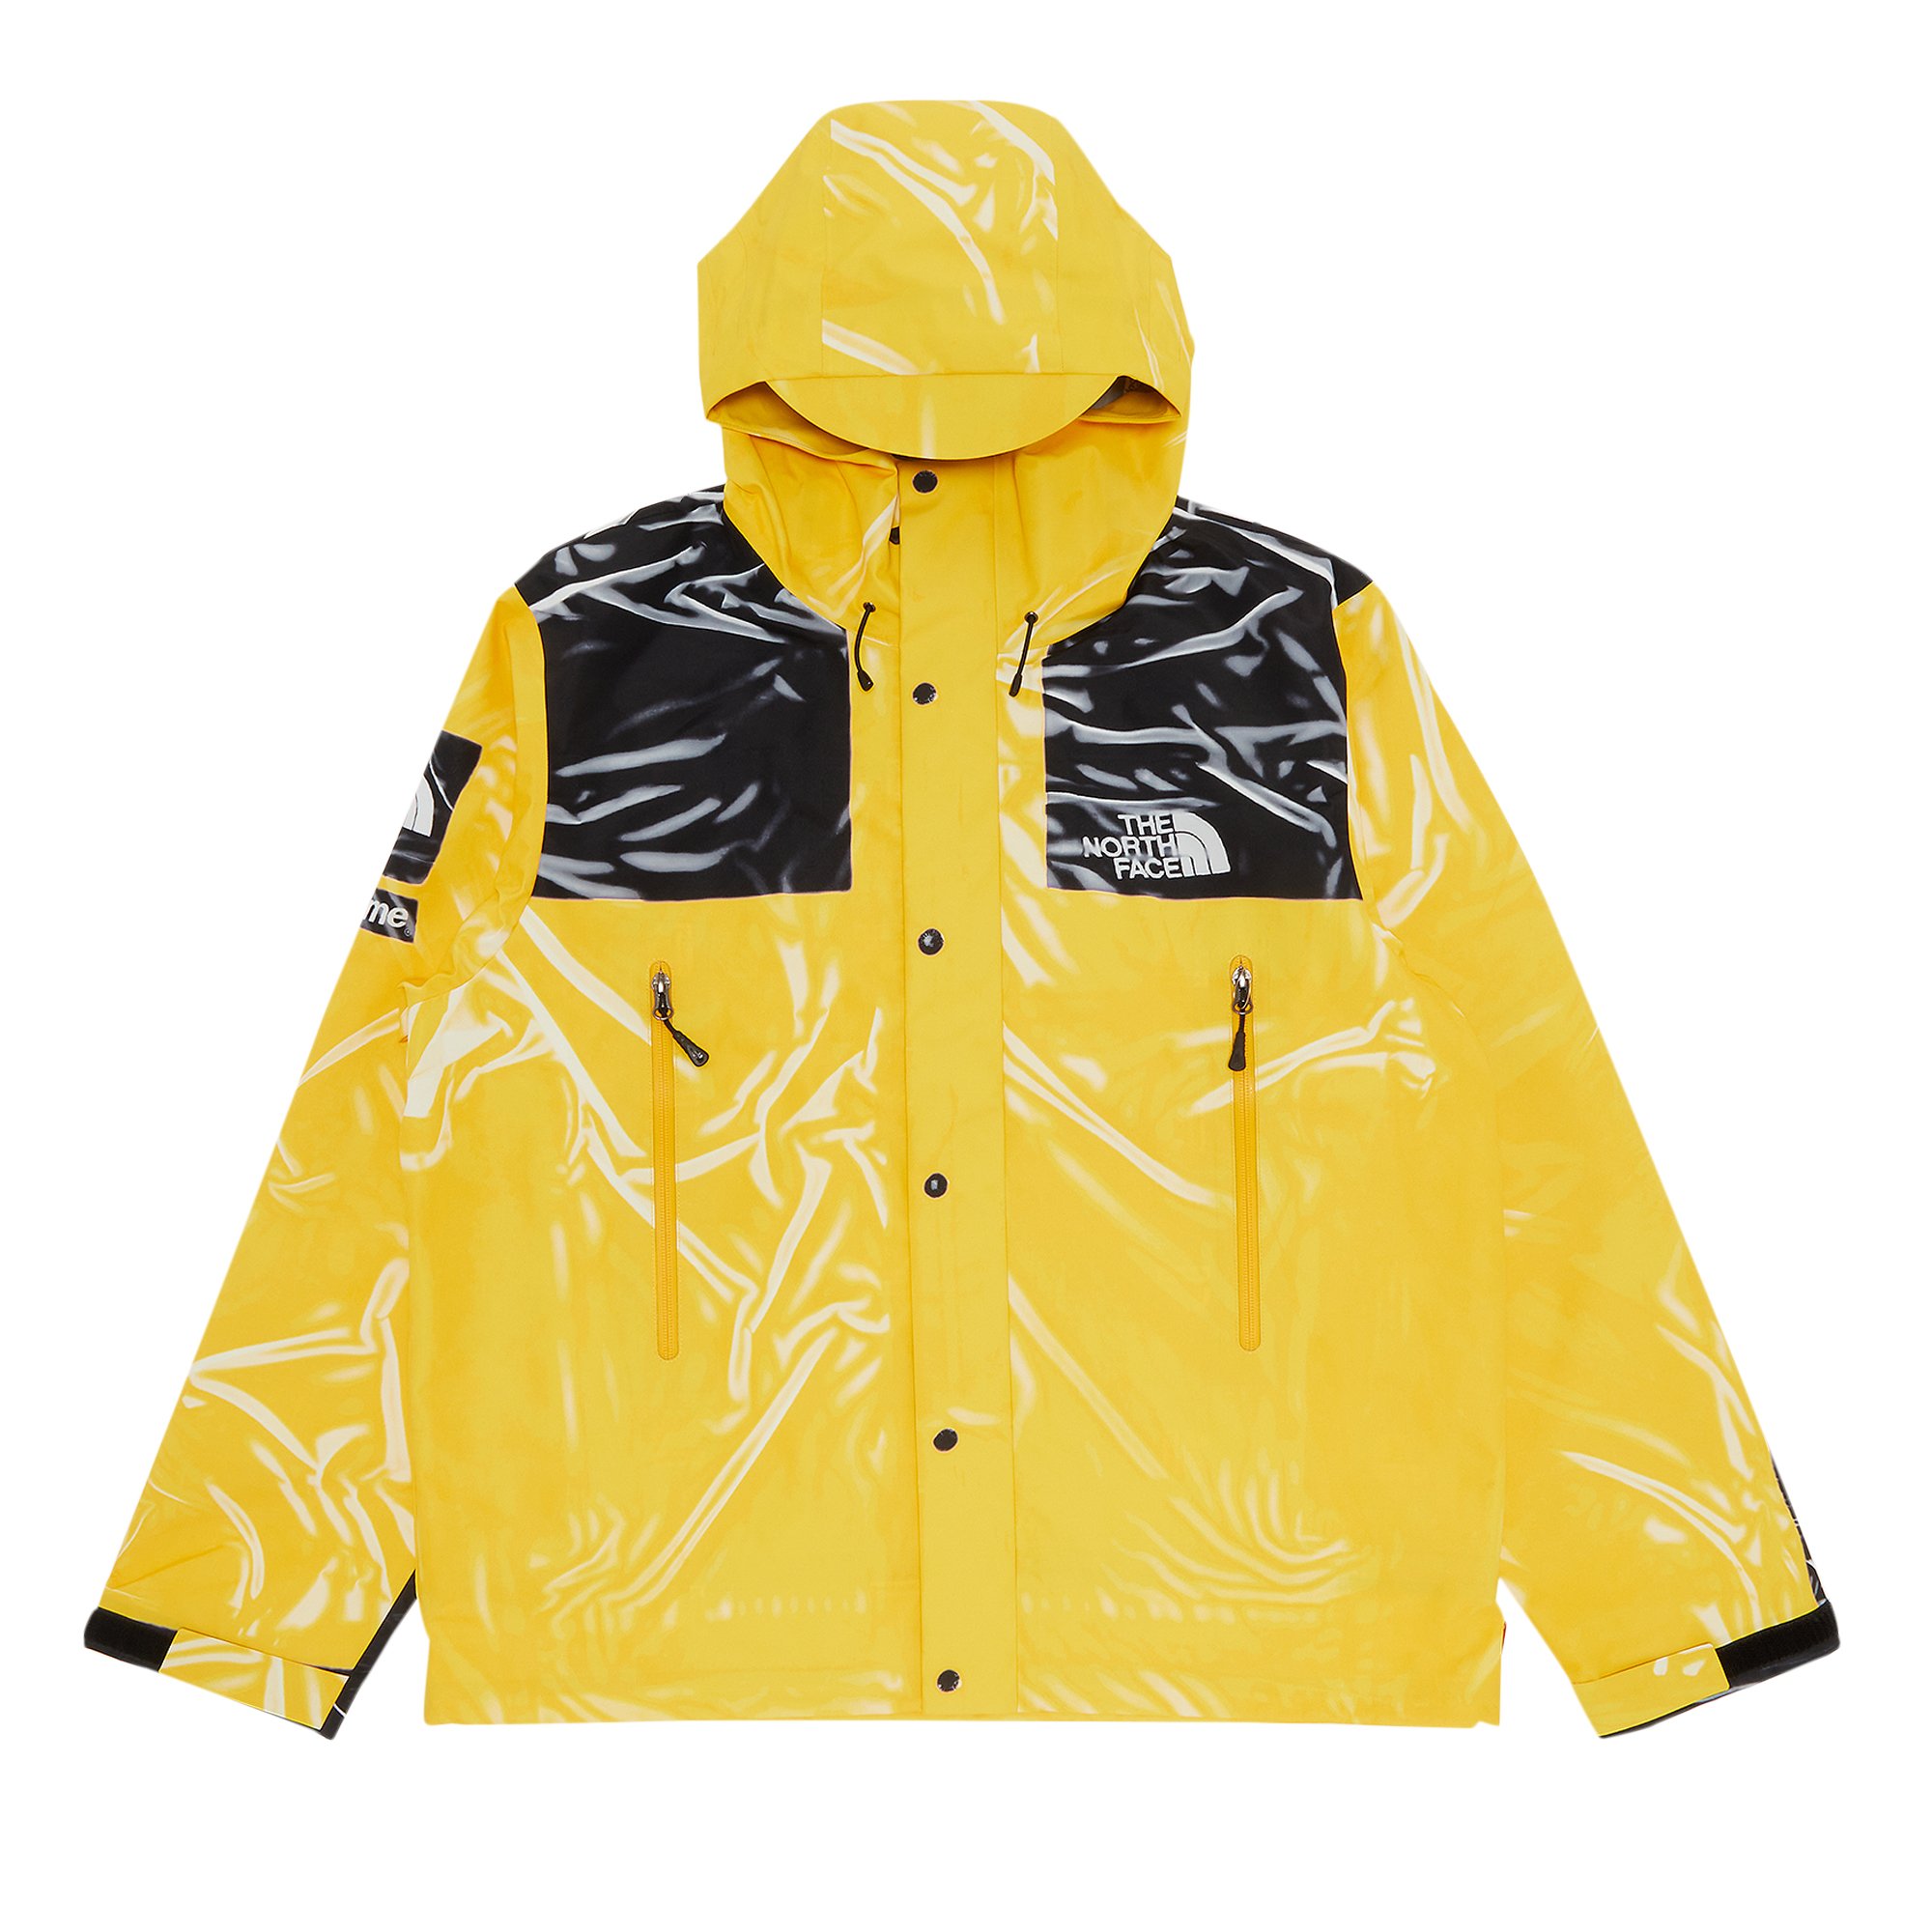 Buy Supreme x The North Face Printed Taped Seam Shell Jacket